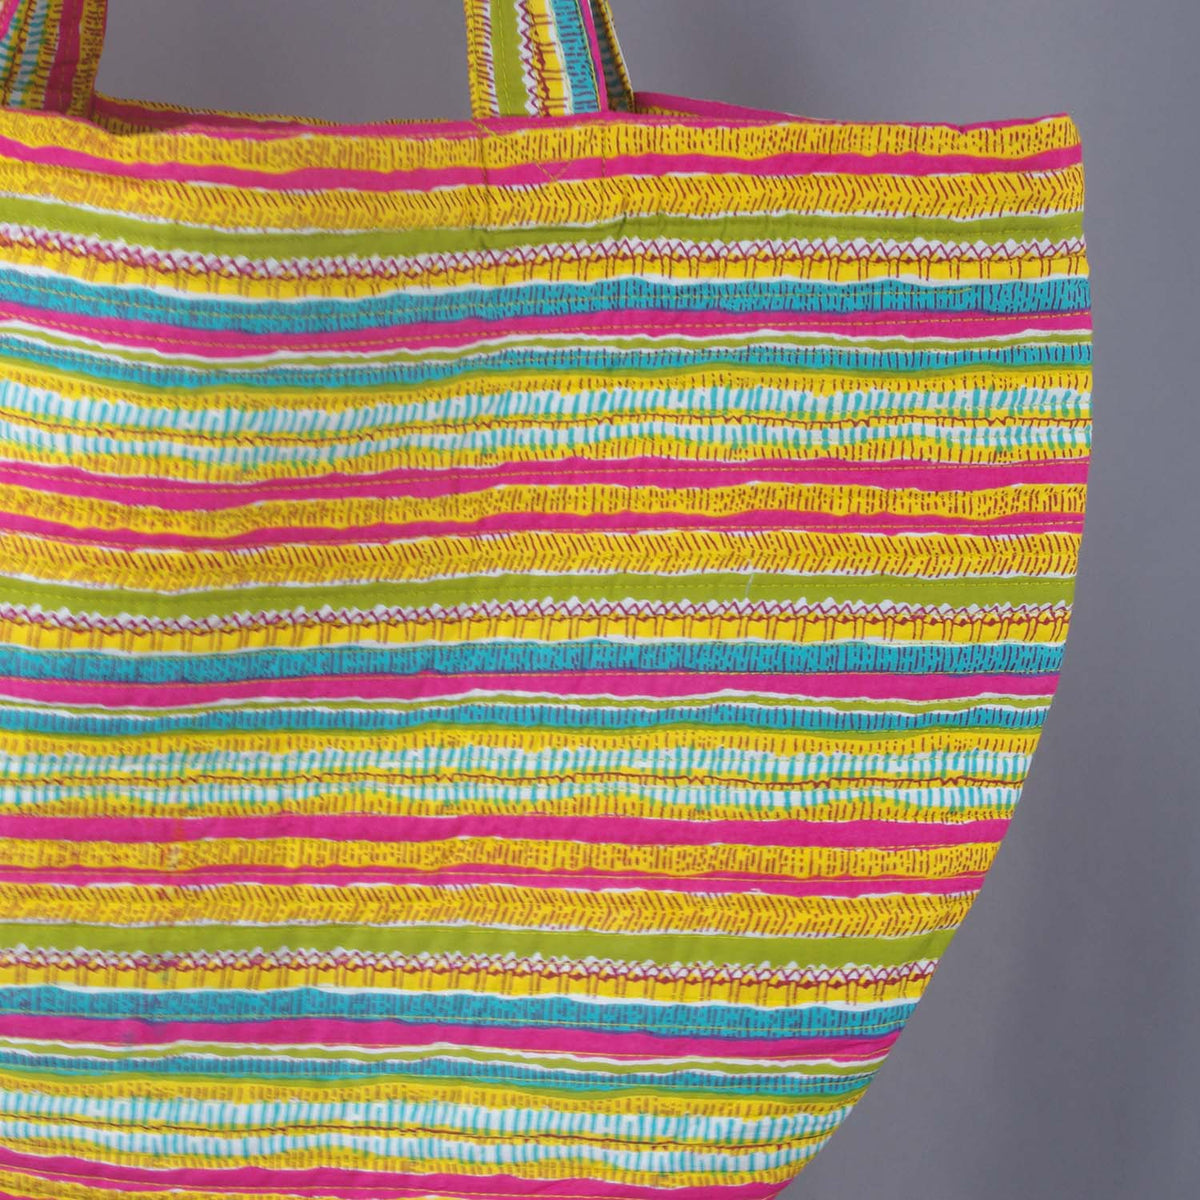 Cotton Quilted Large Shoppping / Beach Bag - Multicolour Striped